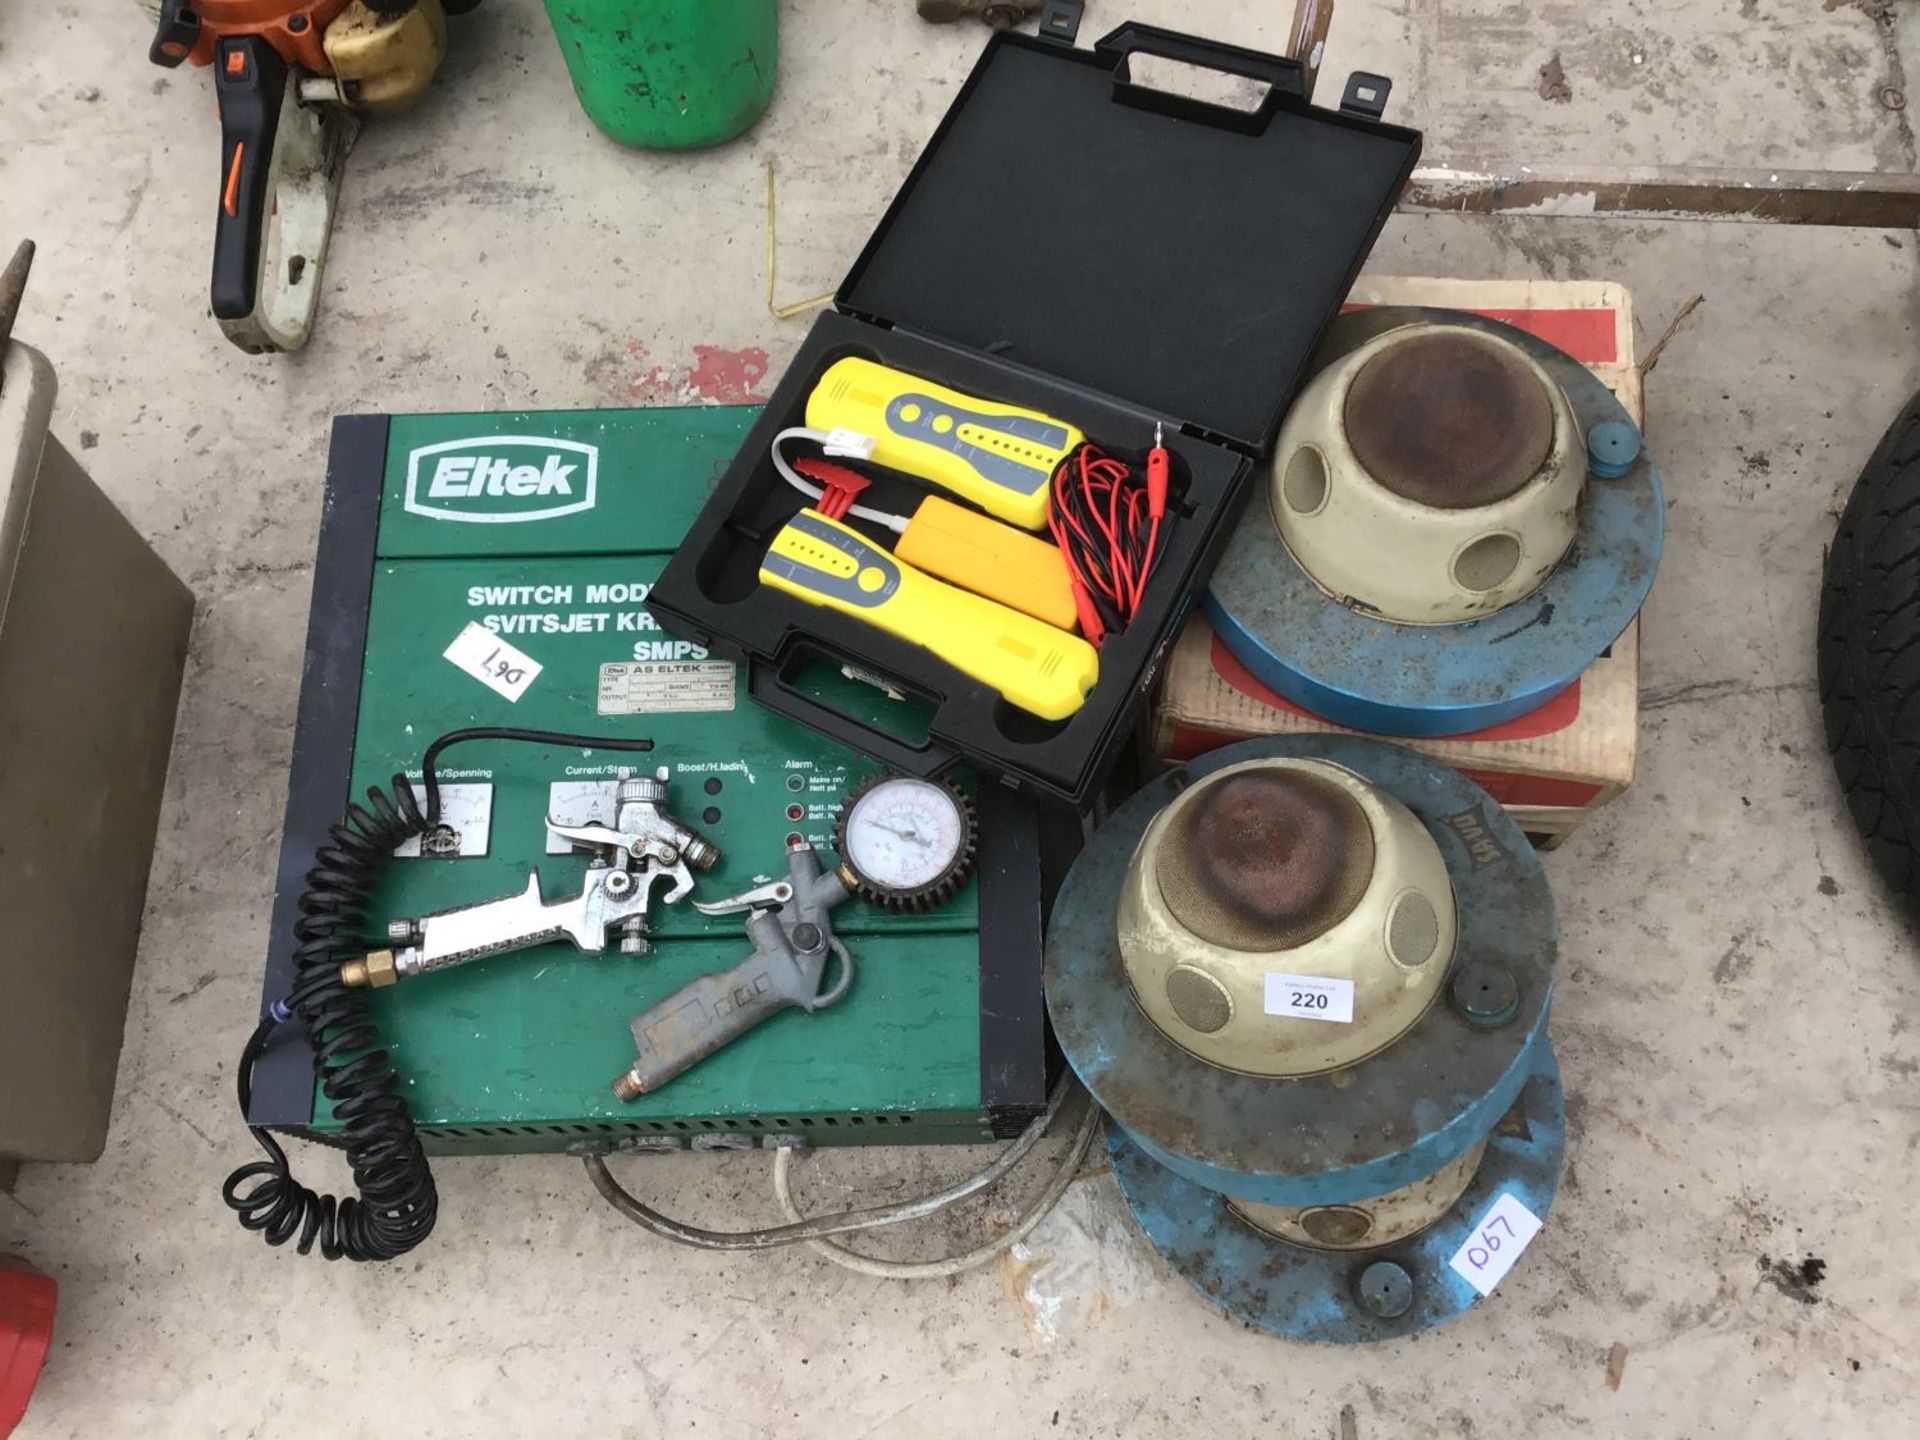 VARIOUS ITEMS TO INCLUDE A ELTECK SWITCH MODEL, ANTI FROST HEATERS, ETC